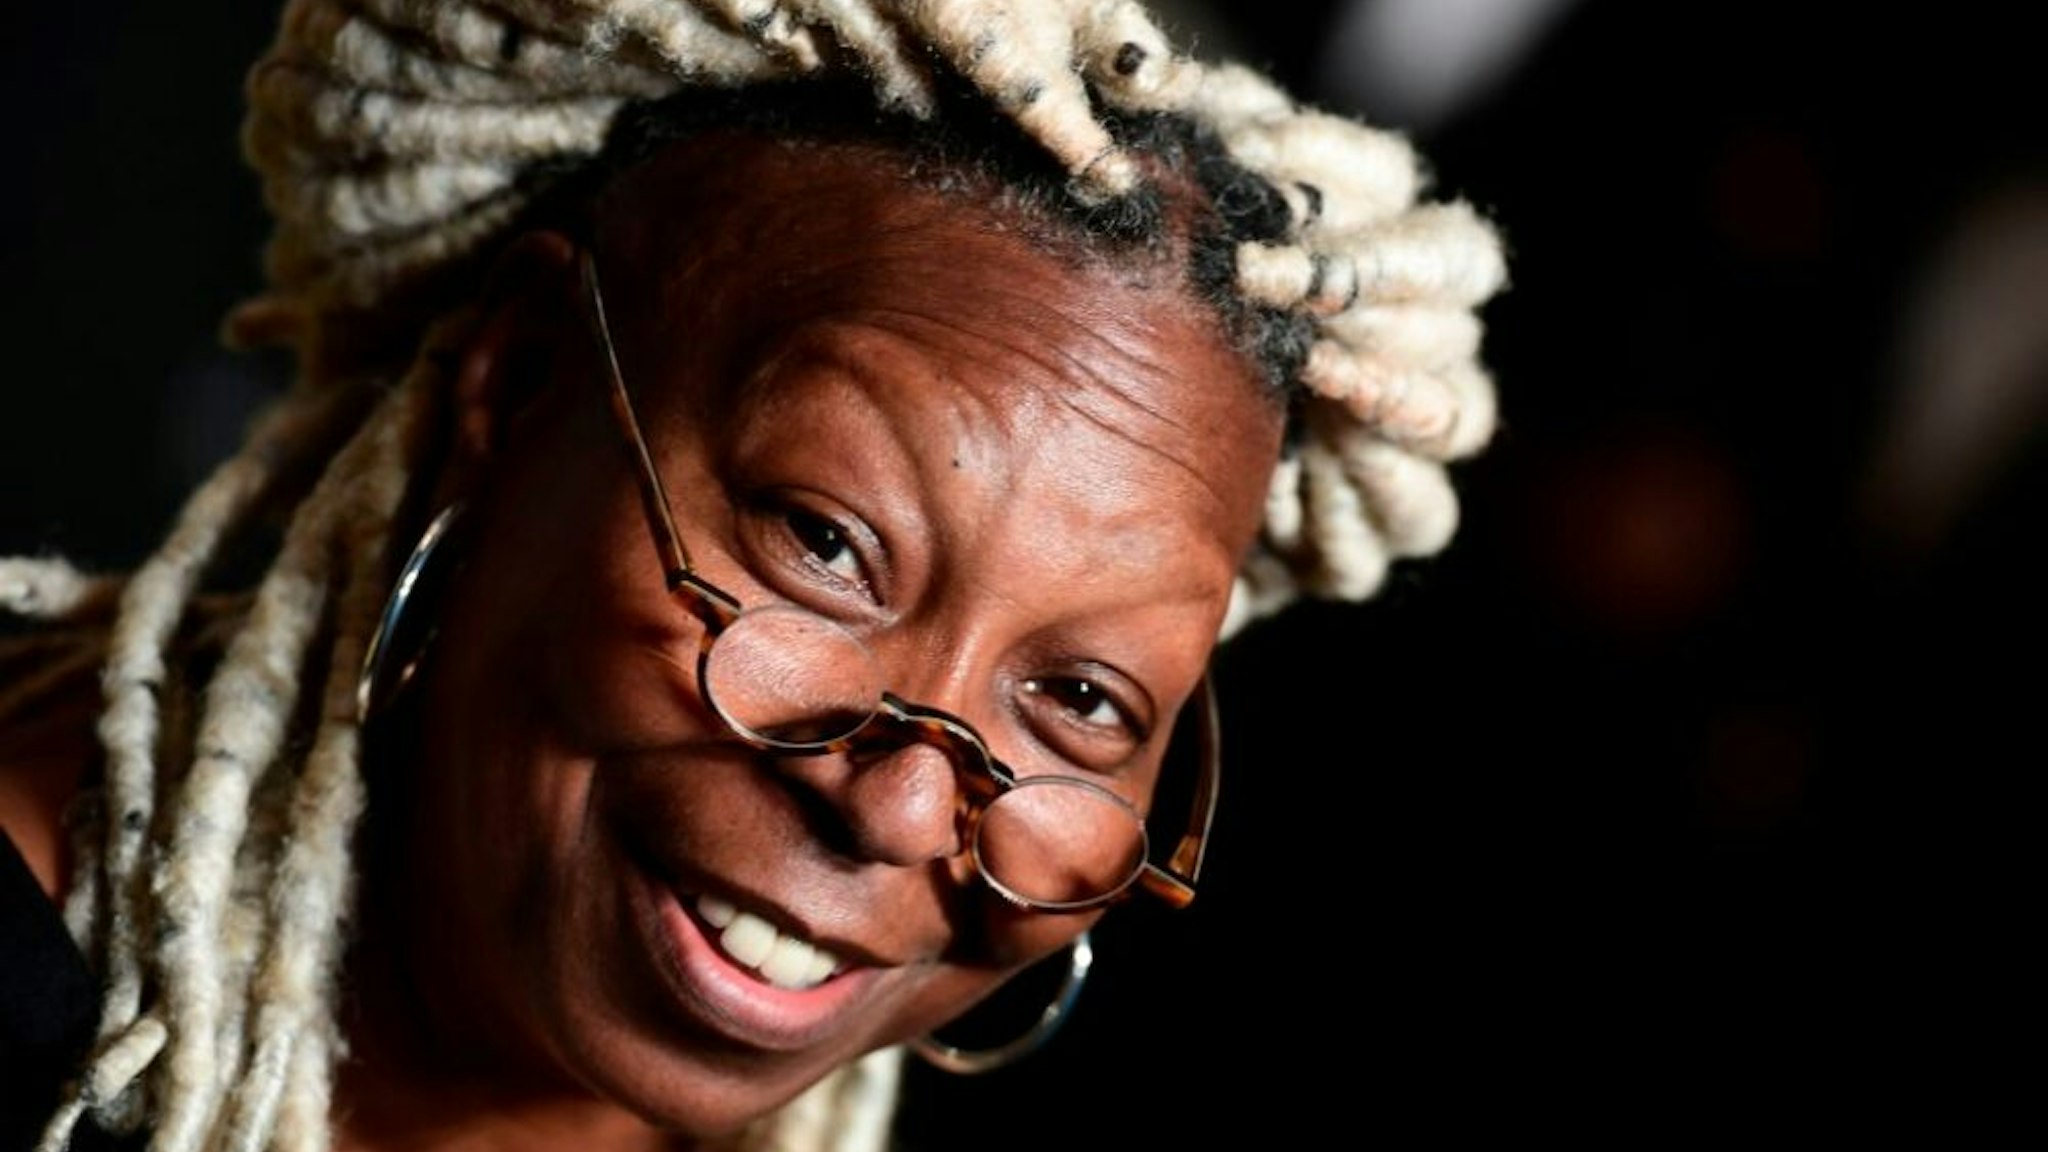 US actress Whoopi Goldberg attends the presentation of the Pirelli 2020 Calendar "Looking For Juliet" at Teatro Filarmonico on December 03, 2019 in Verona, Italy. - Pictures in the new Pirelli calendar 2020 were taken by Italian photographer Paolo Roversi.